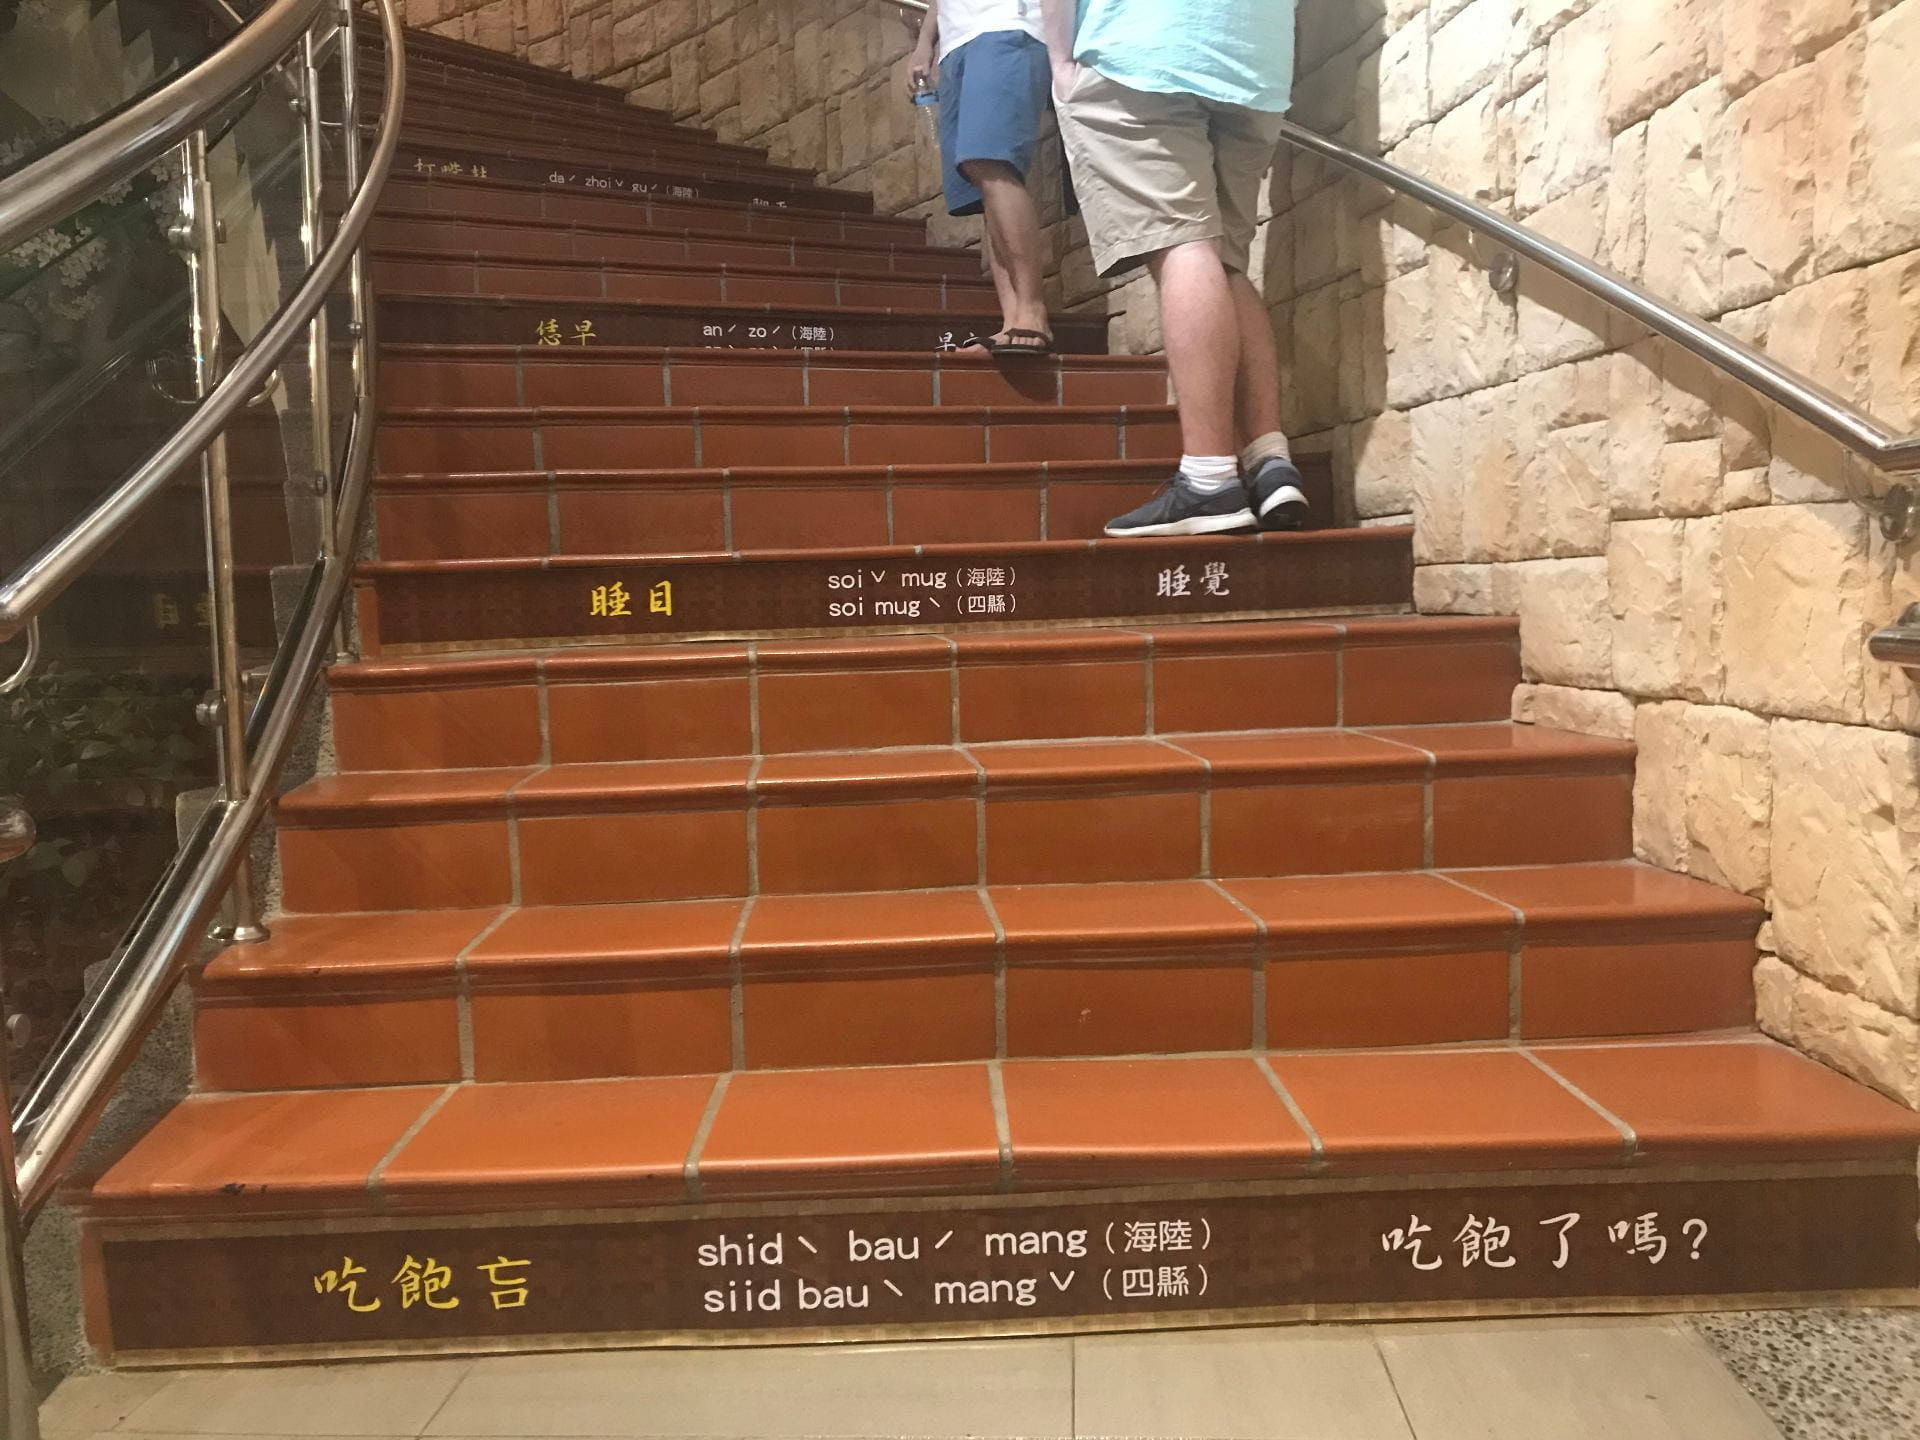 Flight of stairs with terracotta colored tiles with chinese text on the side